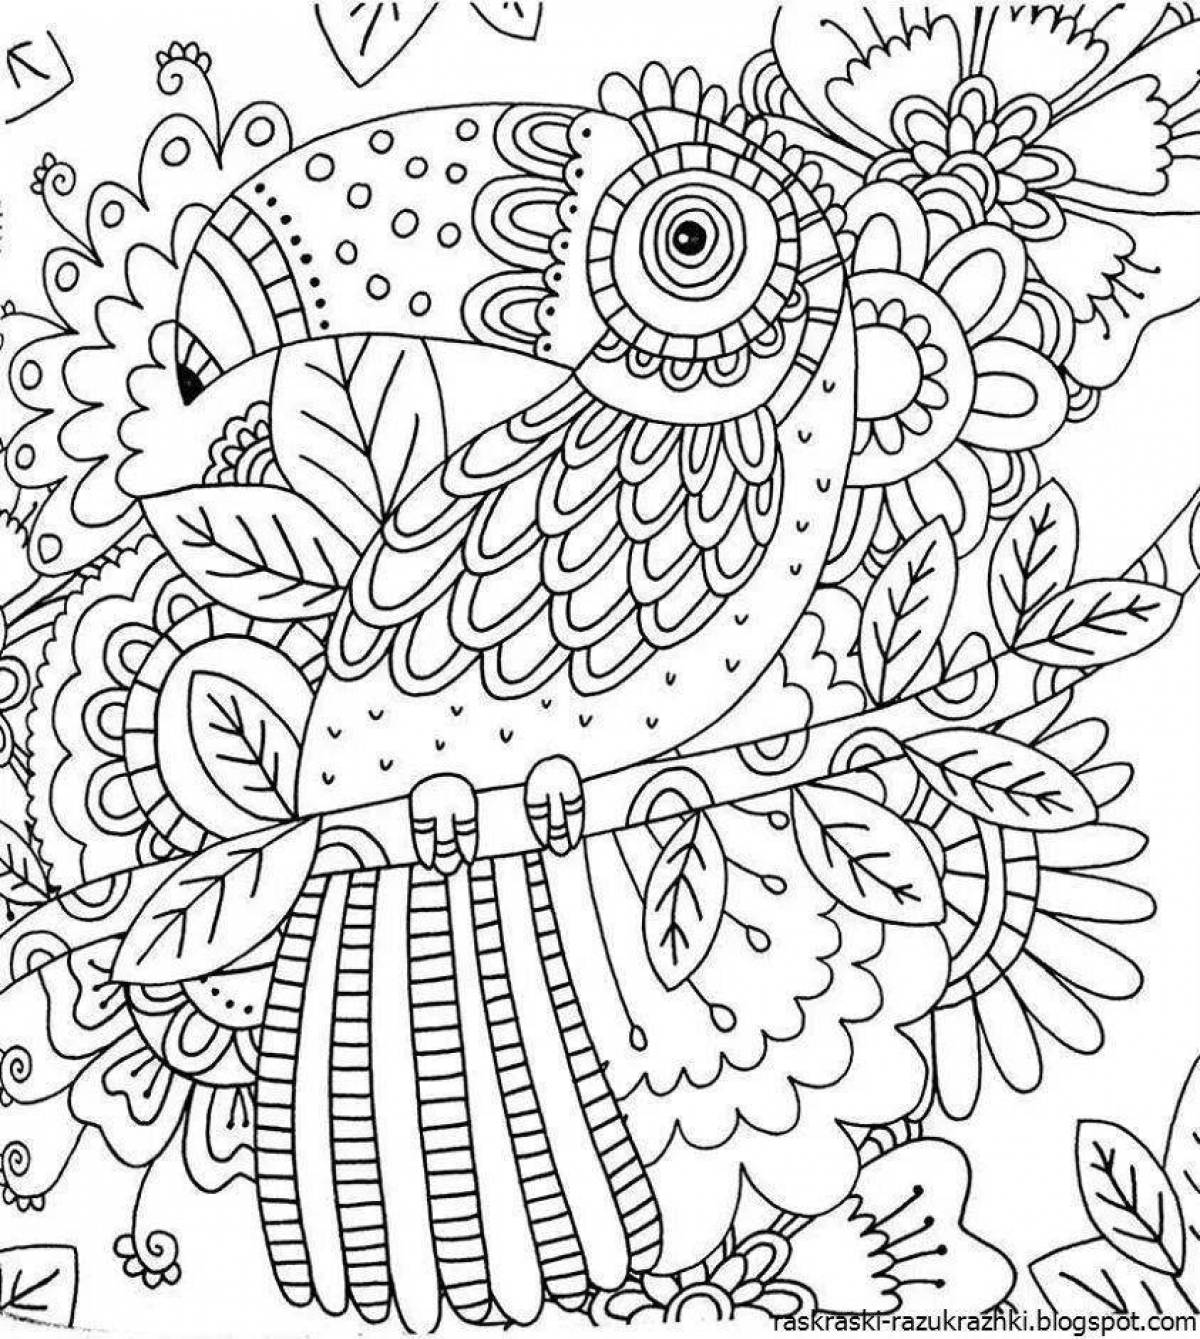 Exciting anti-stress coloring book 